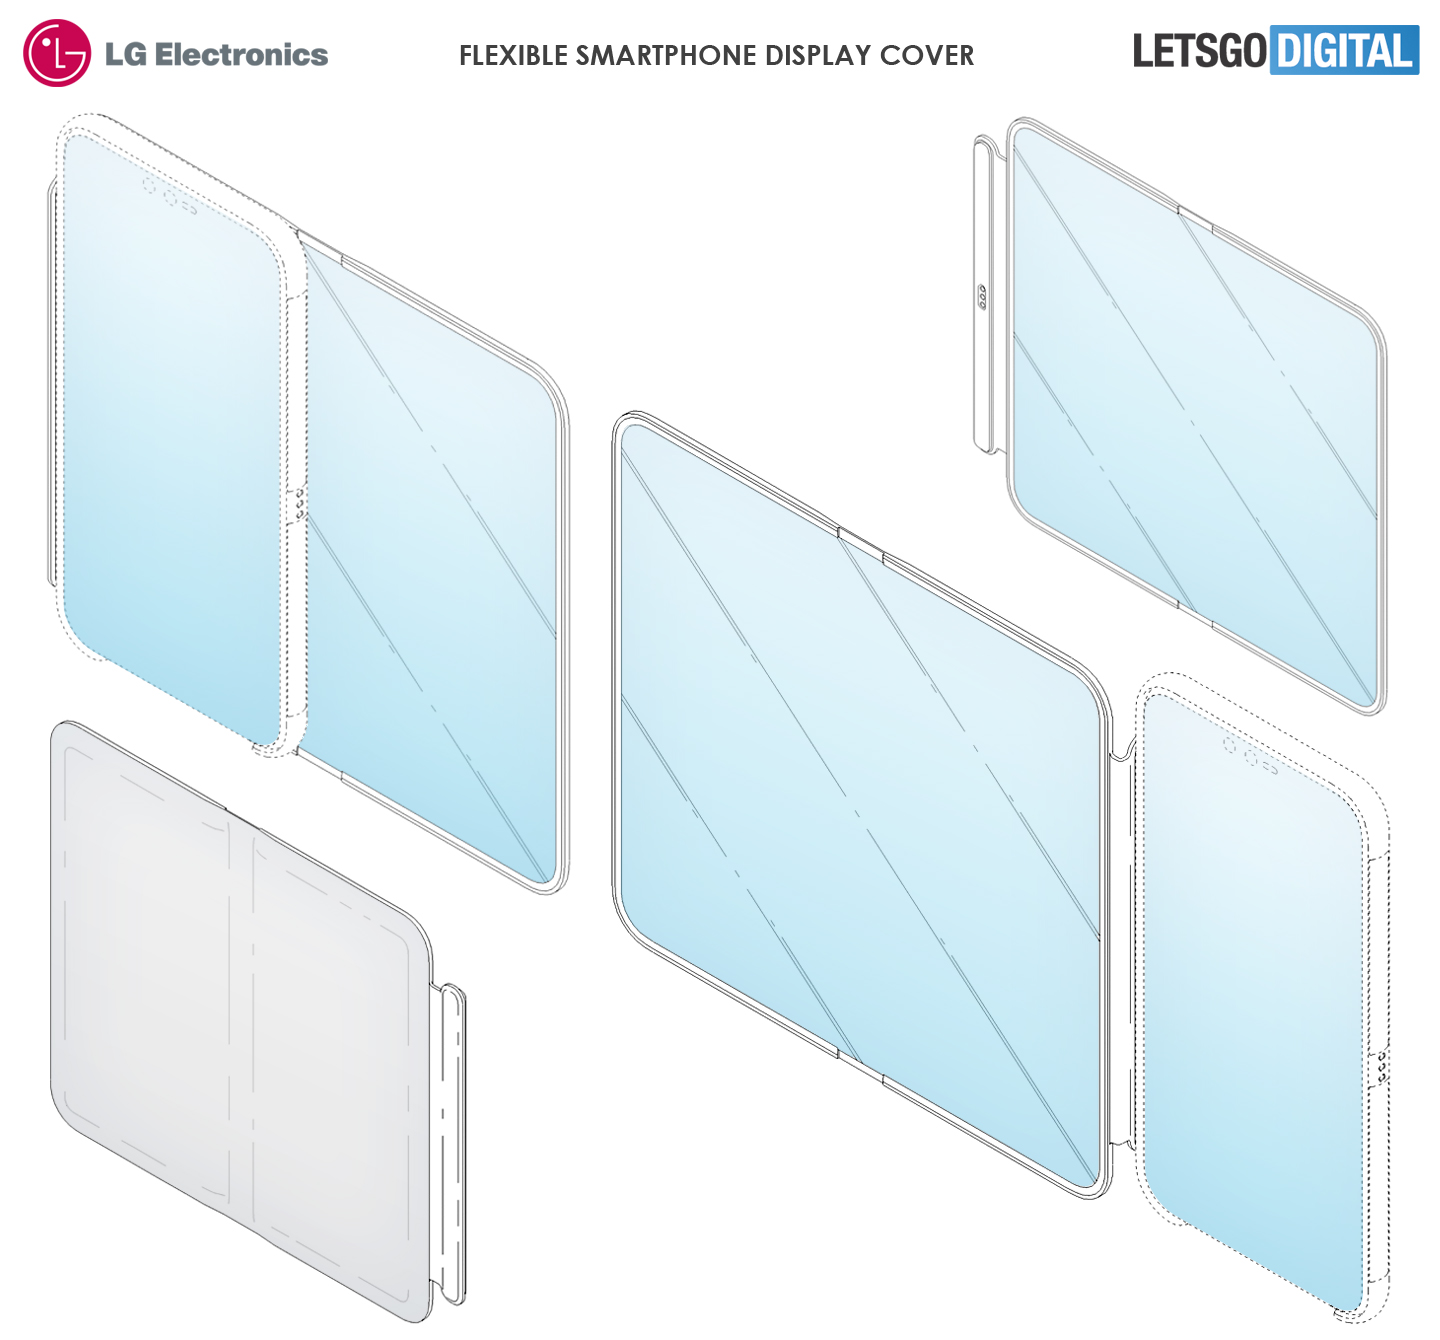 LG flexible smartphone display cover leaked patent